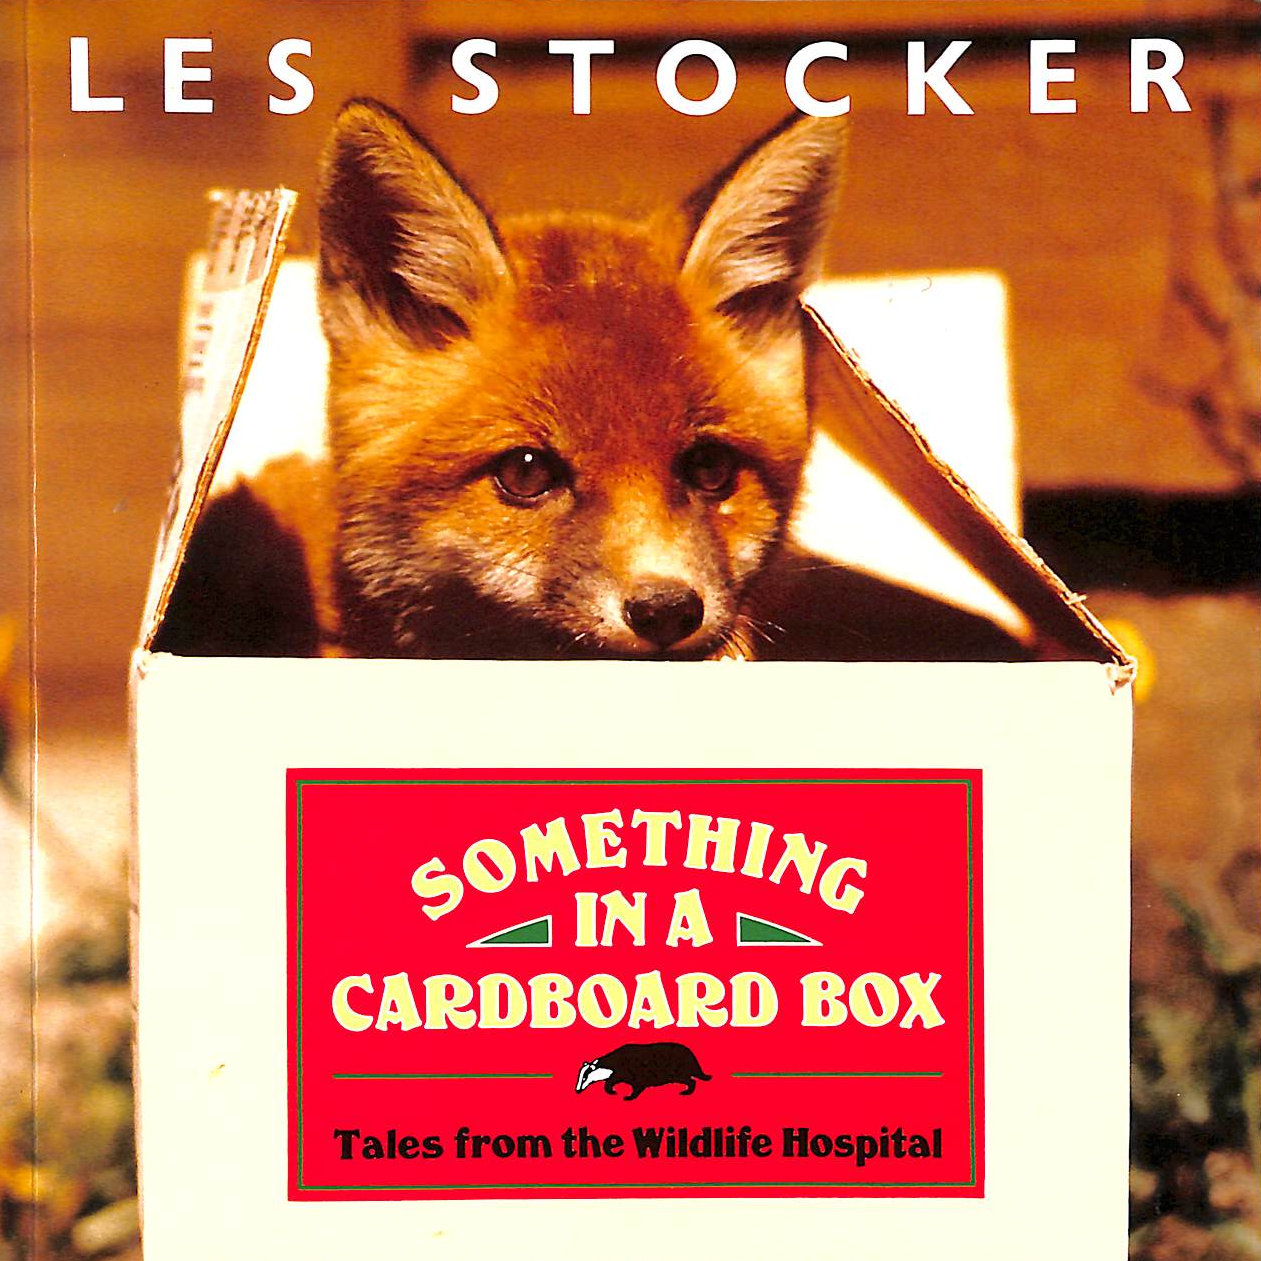 STOCKER MBE, LES - Something in a Cardboard Box: Tales from a Wildlife Hospital